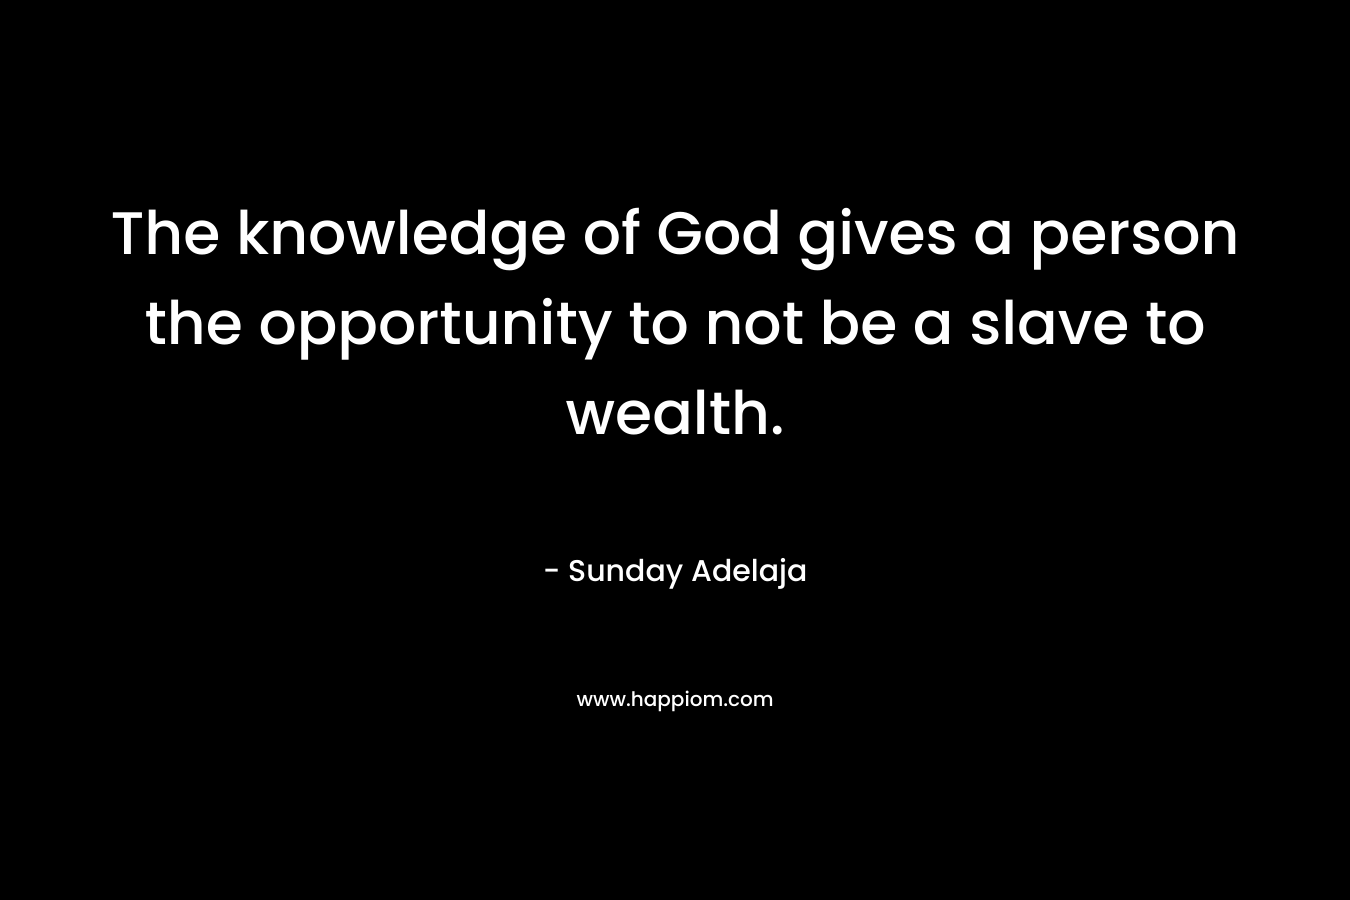 The knowledge of God gives a person the opportunity to not be a slave to wealth.